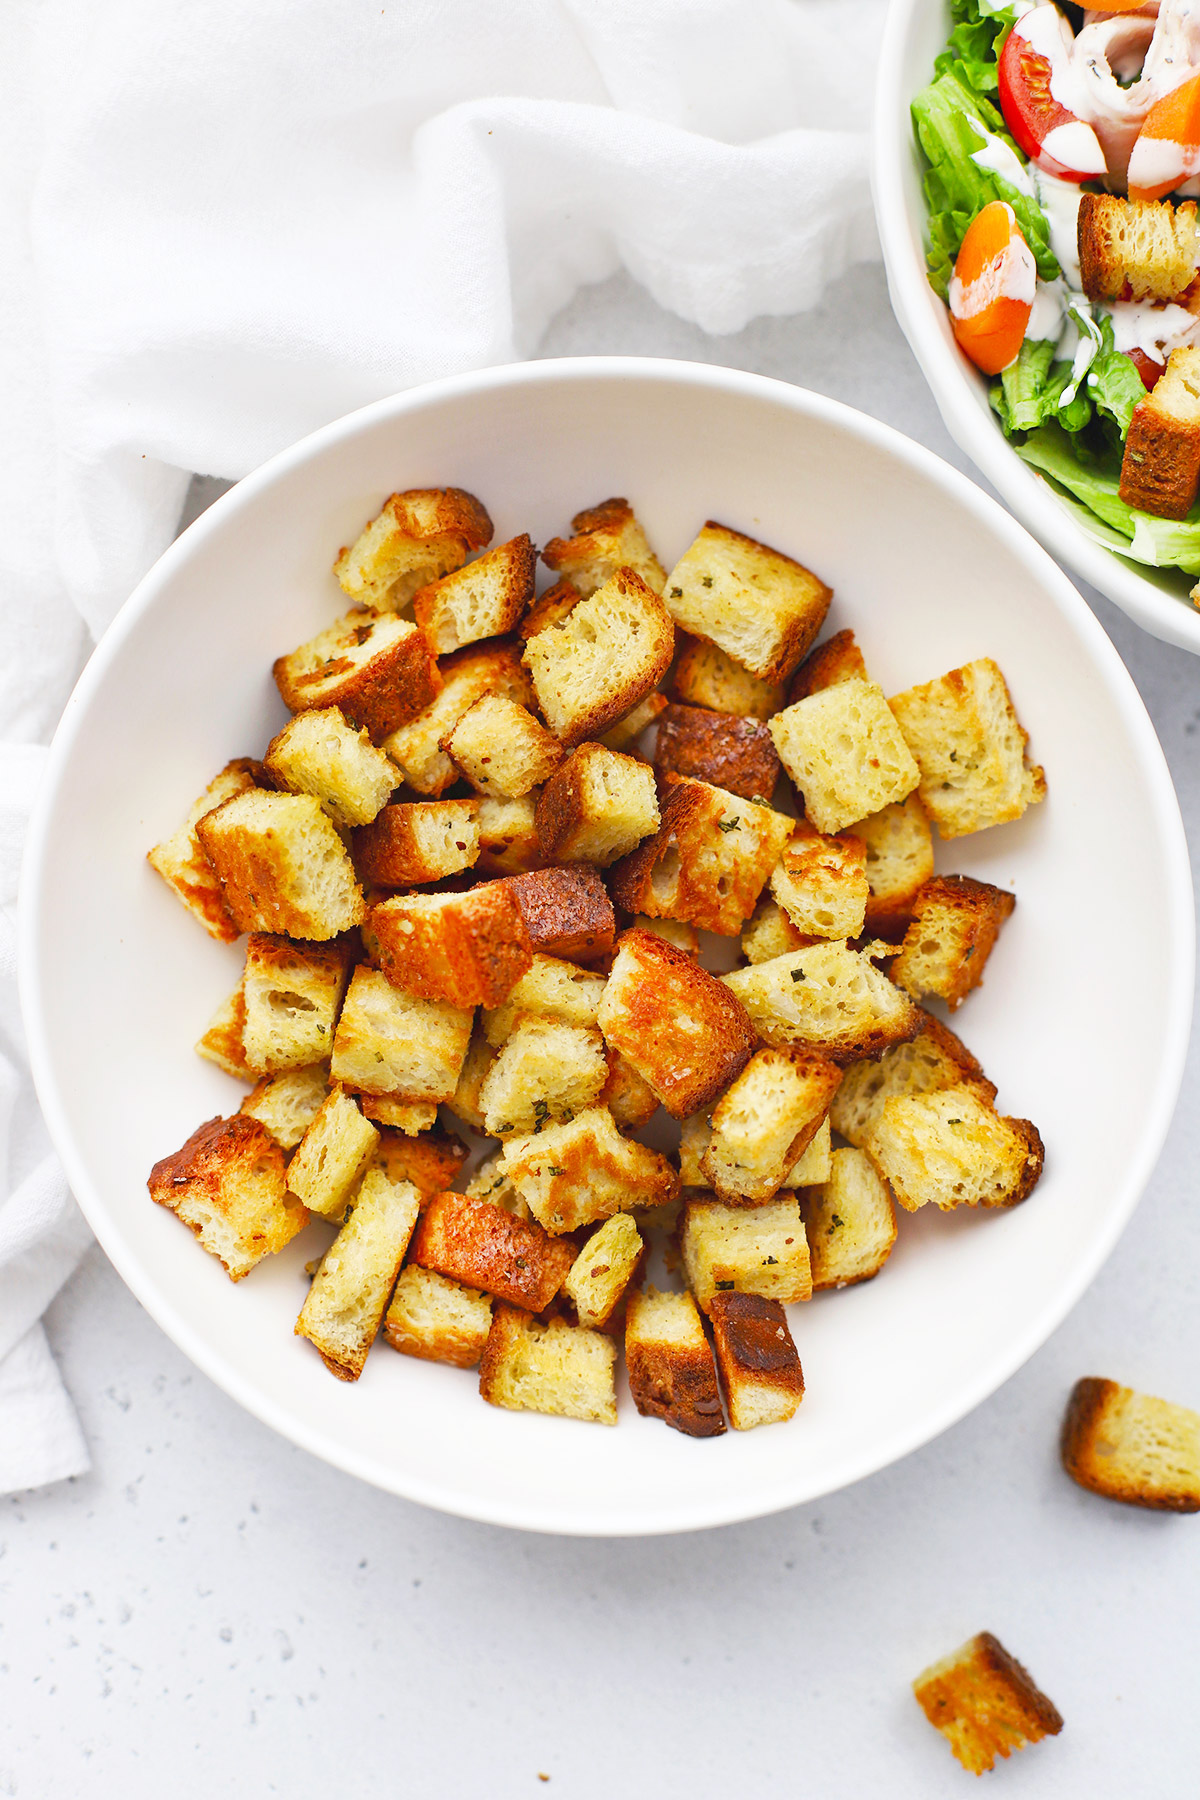 How to Make Gluten-Free Croutons